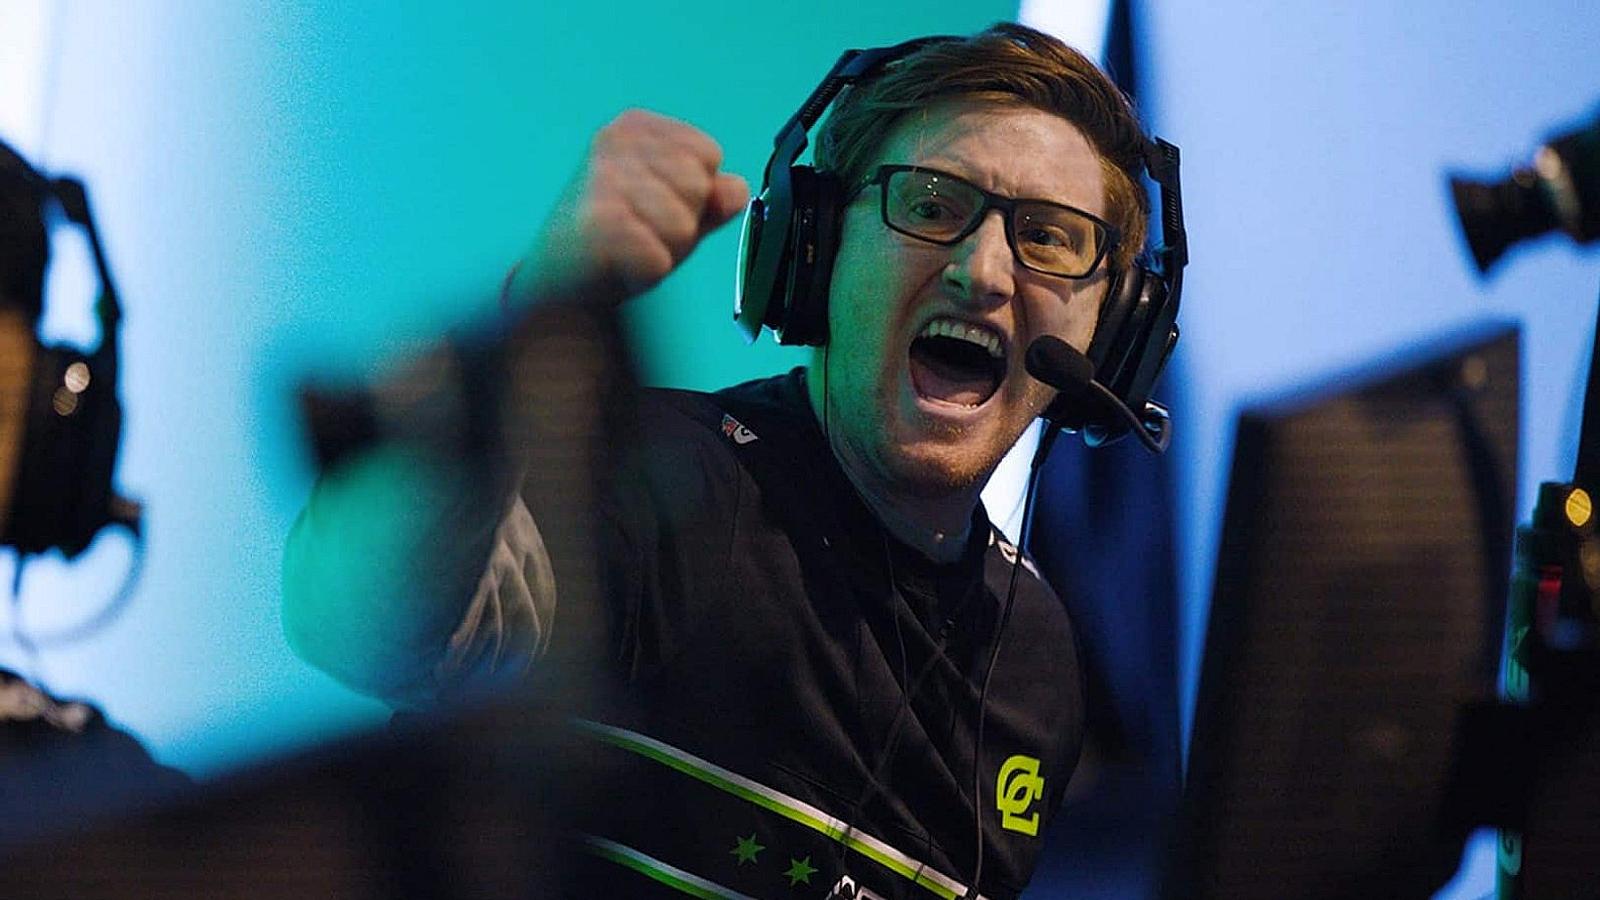 scump holding his fist up in celebration